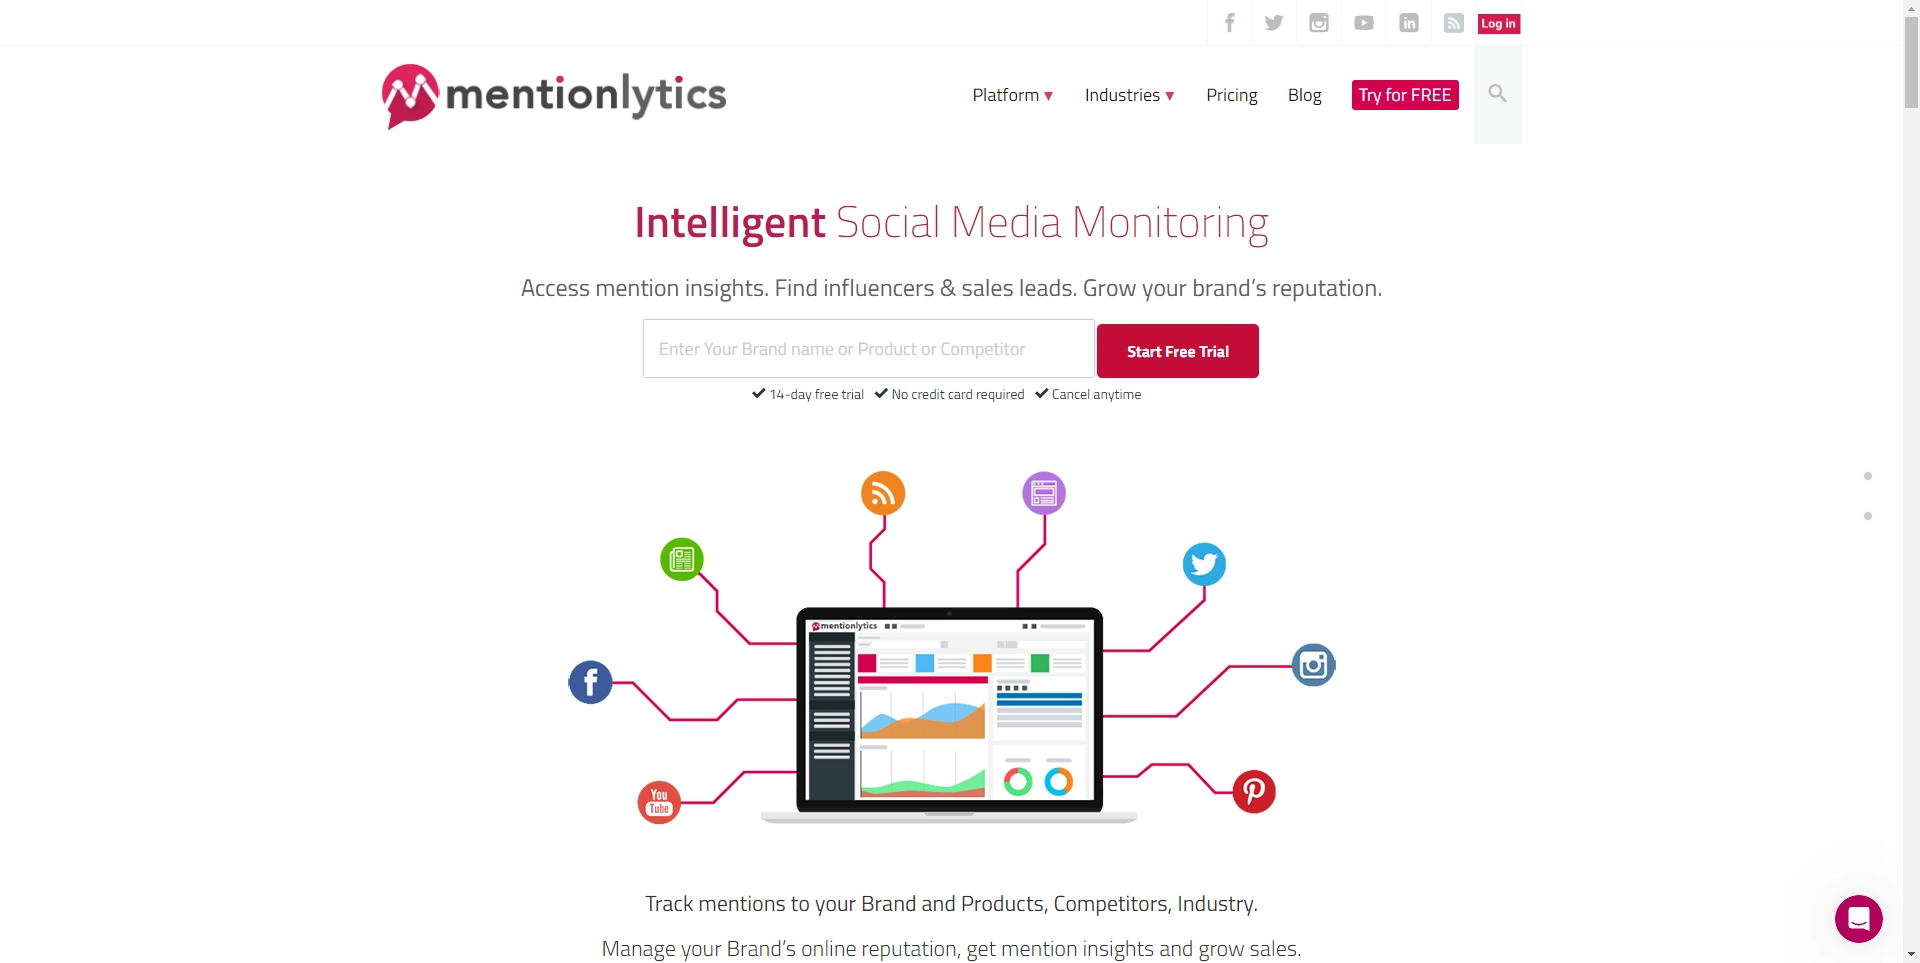 Mentionlytics landing page with a visual and text